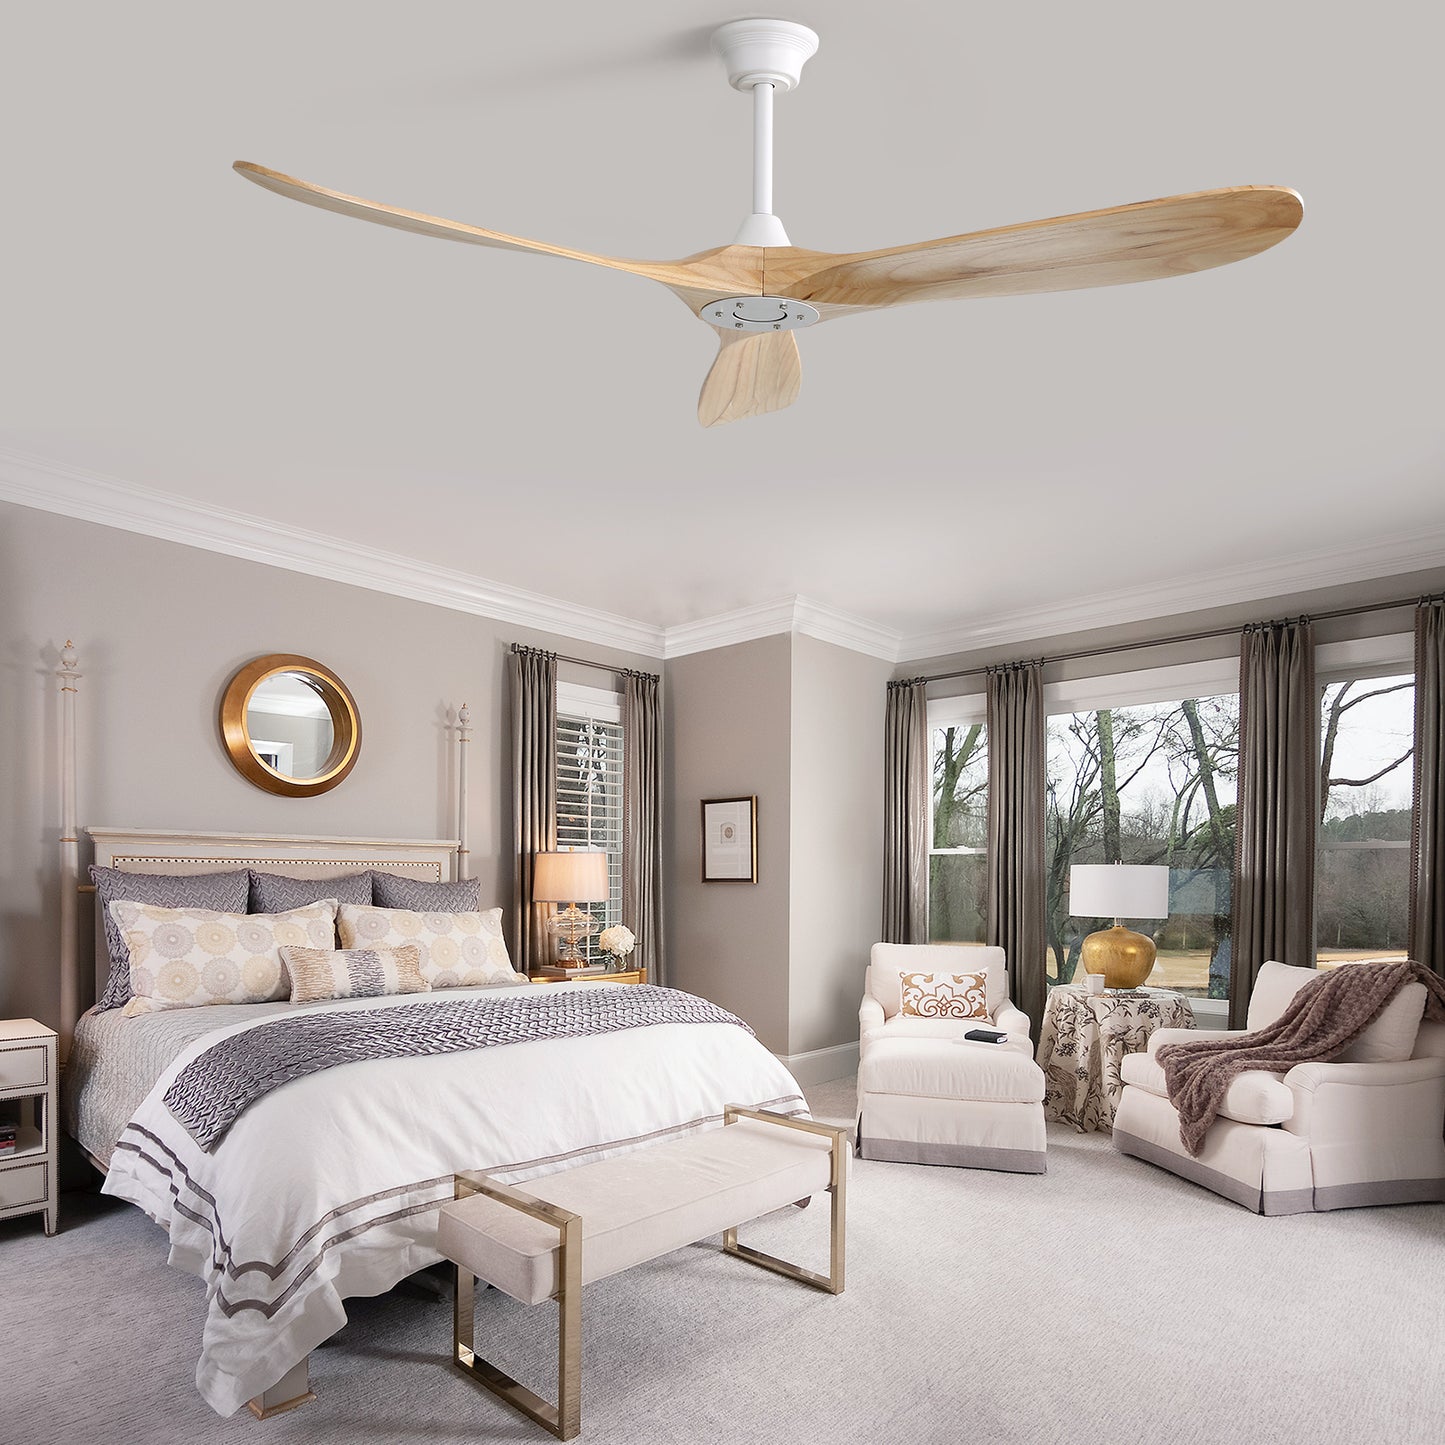 60-Inch Modern Indoor Ceiling Fan with 3 Color Dimmable 6 Speed Remote Control and Solid Wood Blades for Living Room